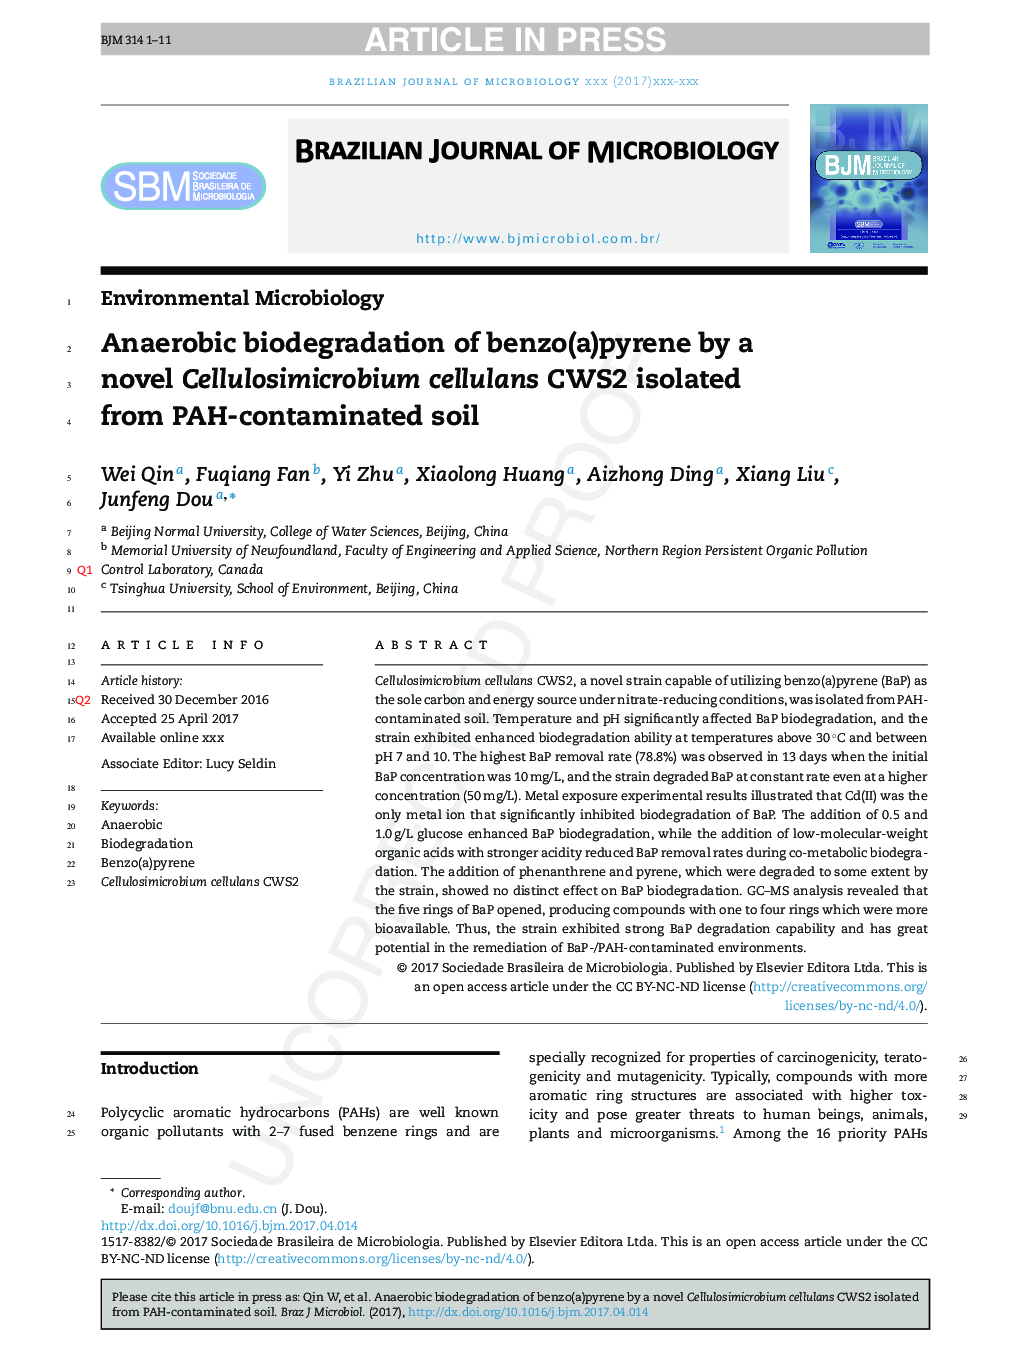 Anaerobic biodegradation of benzo(a)pyrene by a novel Cellulosimicrobium cellulans CWS2 isolated from polycyclic aromatic hydrocarbon-contaminated soil